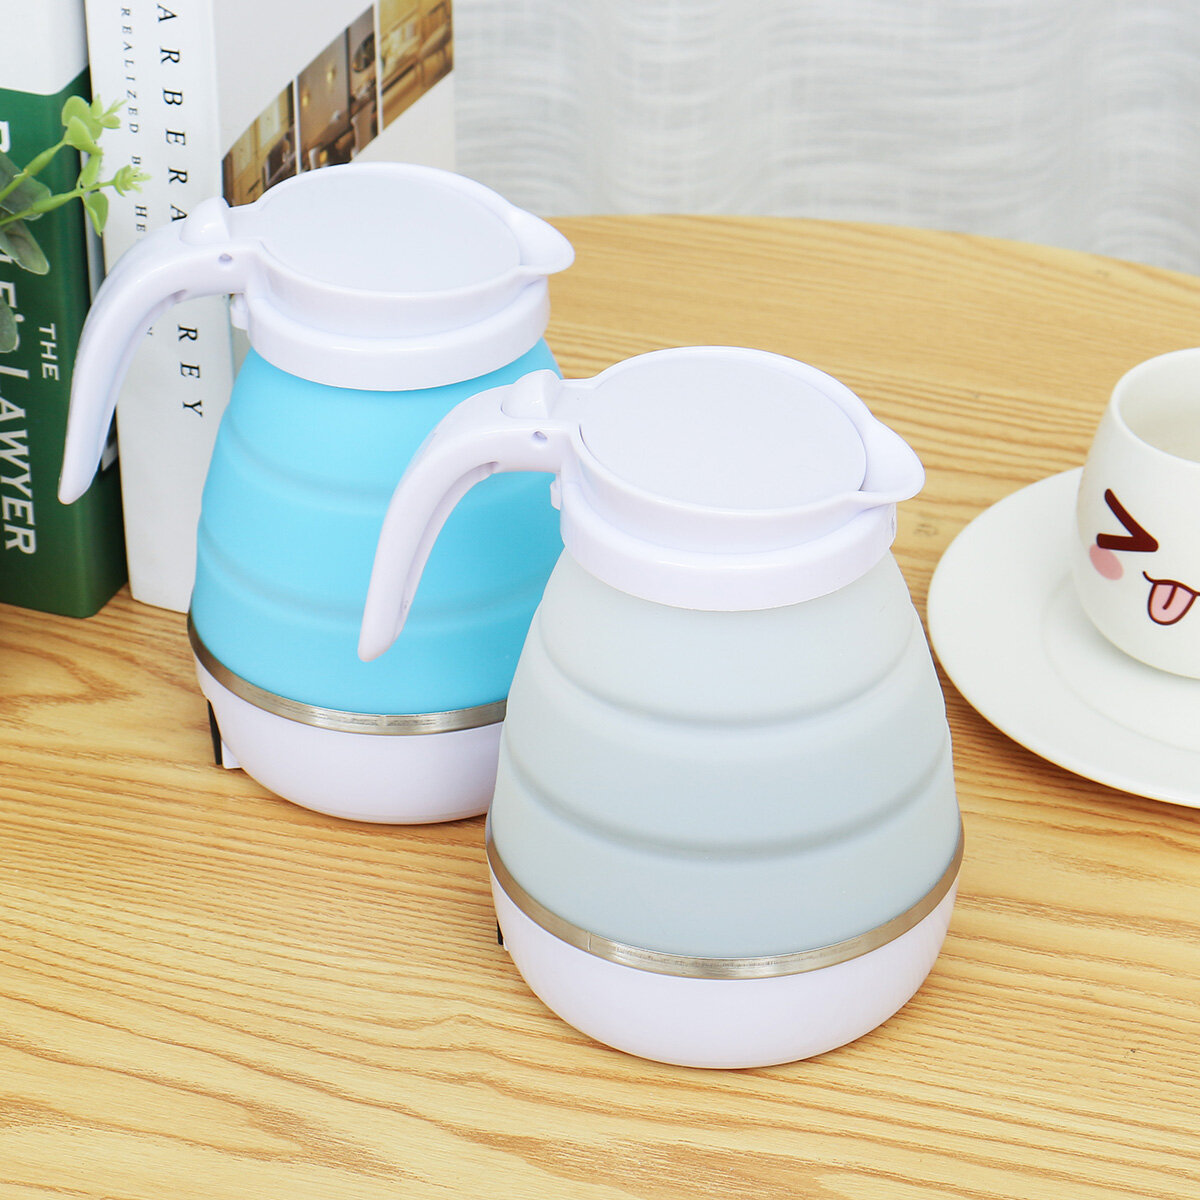 

600W 600ML Electric Water Kettle Silicone Travel Boiler Pot Foldable Portable Kettle